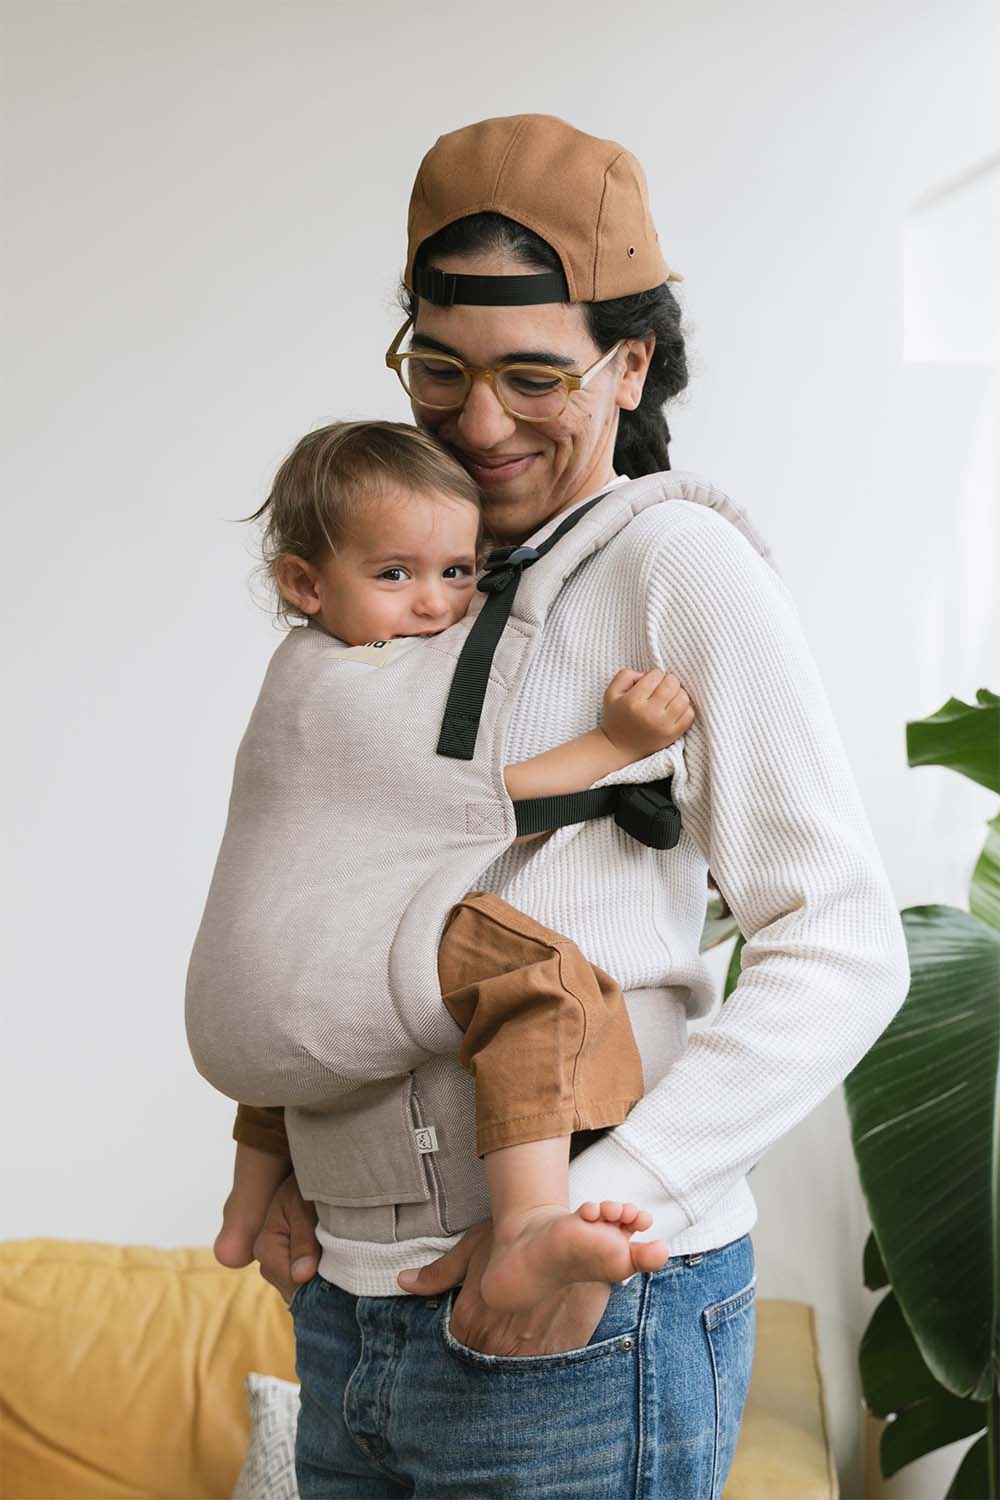 Sand - Linen Free-to-Grow Baby Carrier